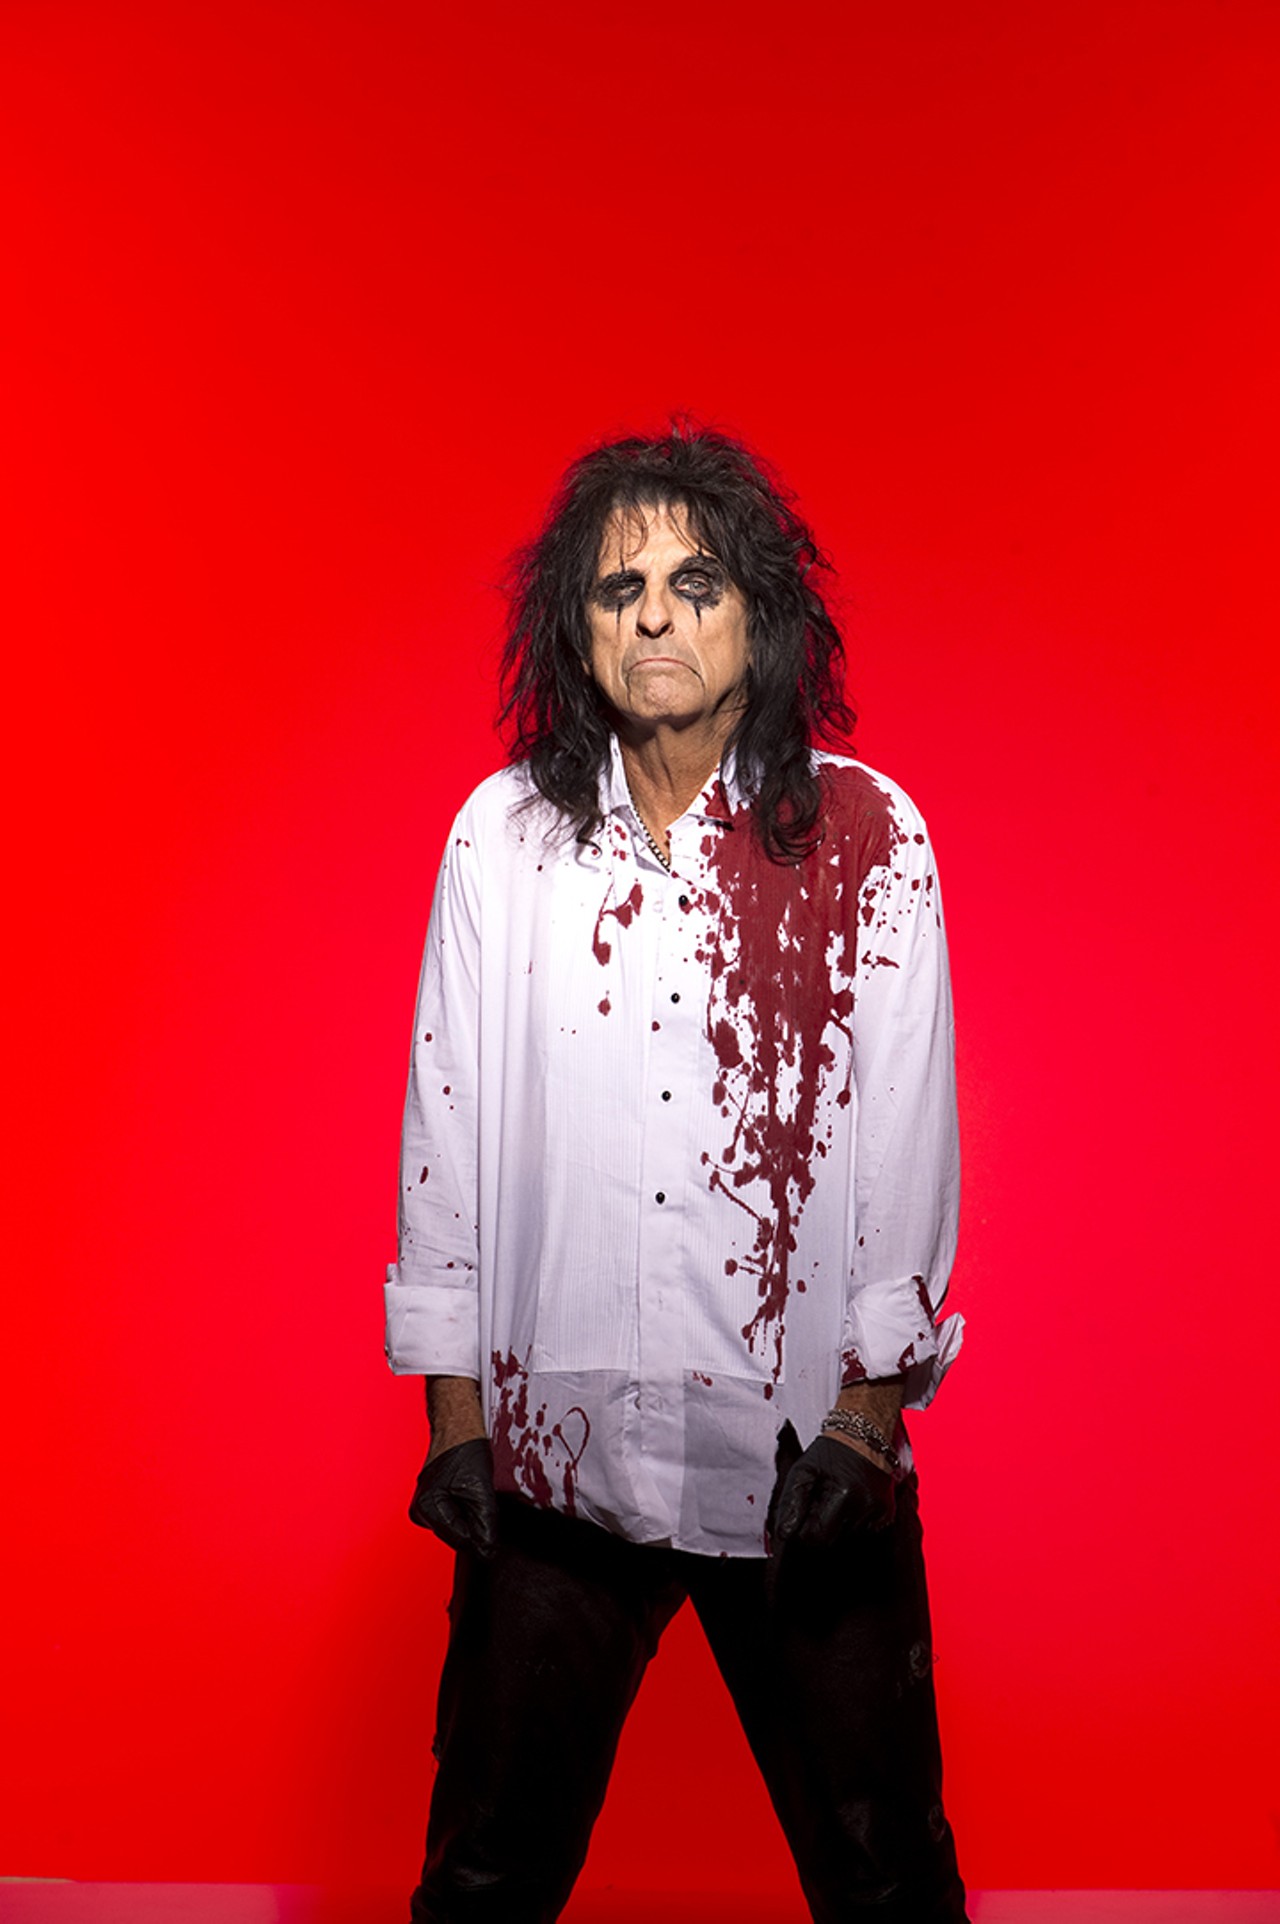 Sunday, Aug. 14Alice Cooper at the Dr. Phillips Center